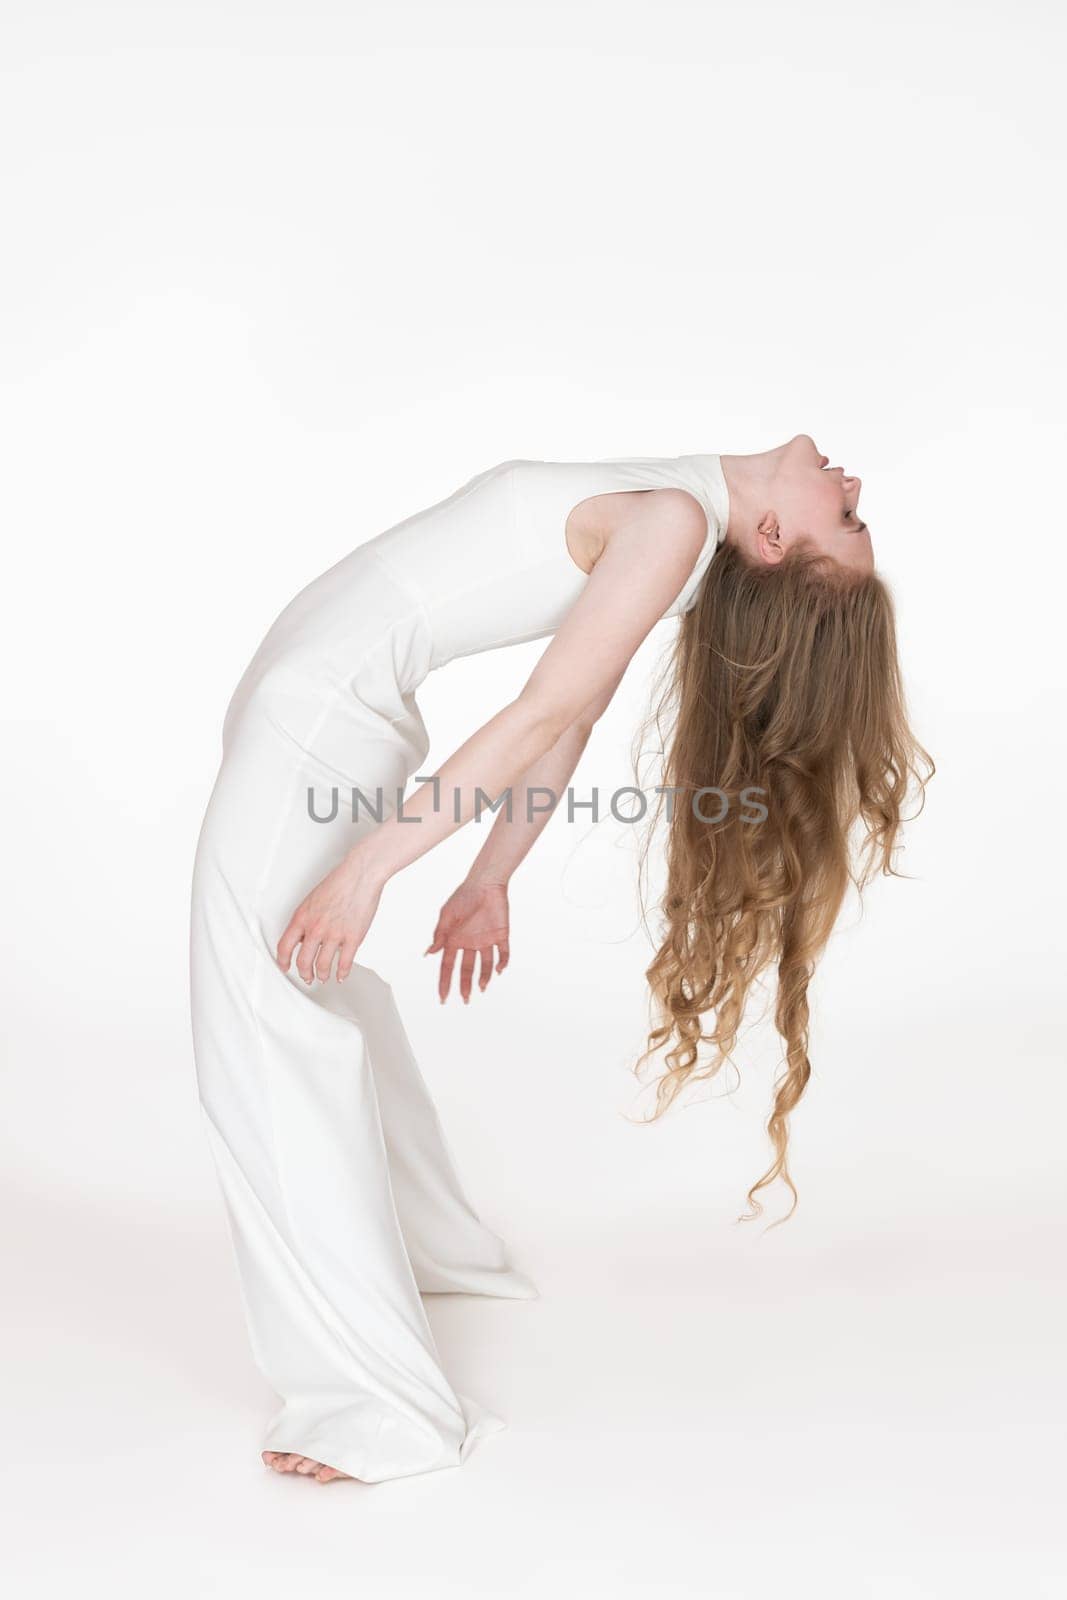 Flexible young blonde woman dancer with eyes closed bending over backwards. Full length, side view by Alexander-Piragis